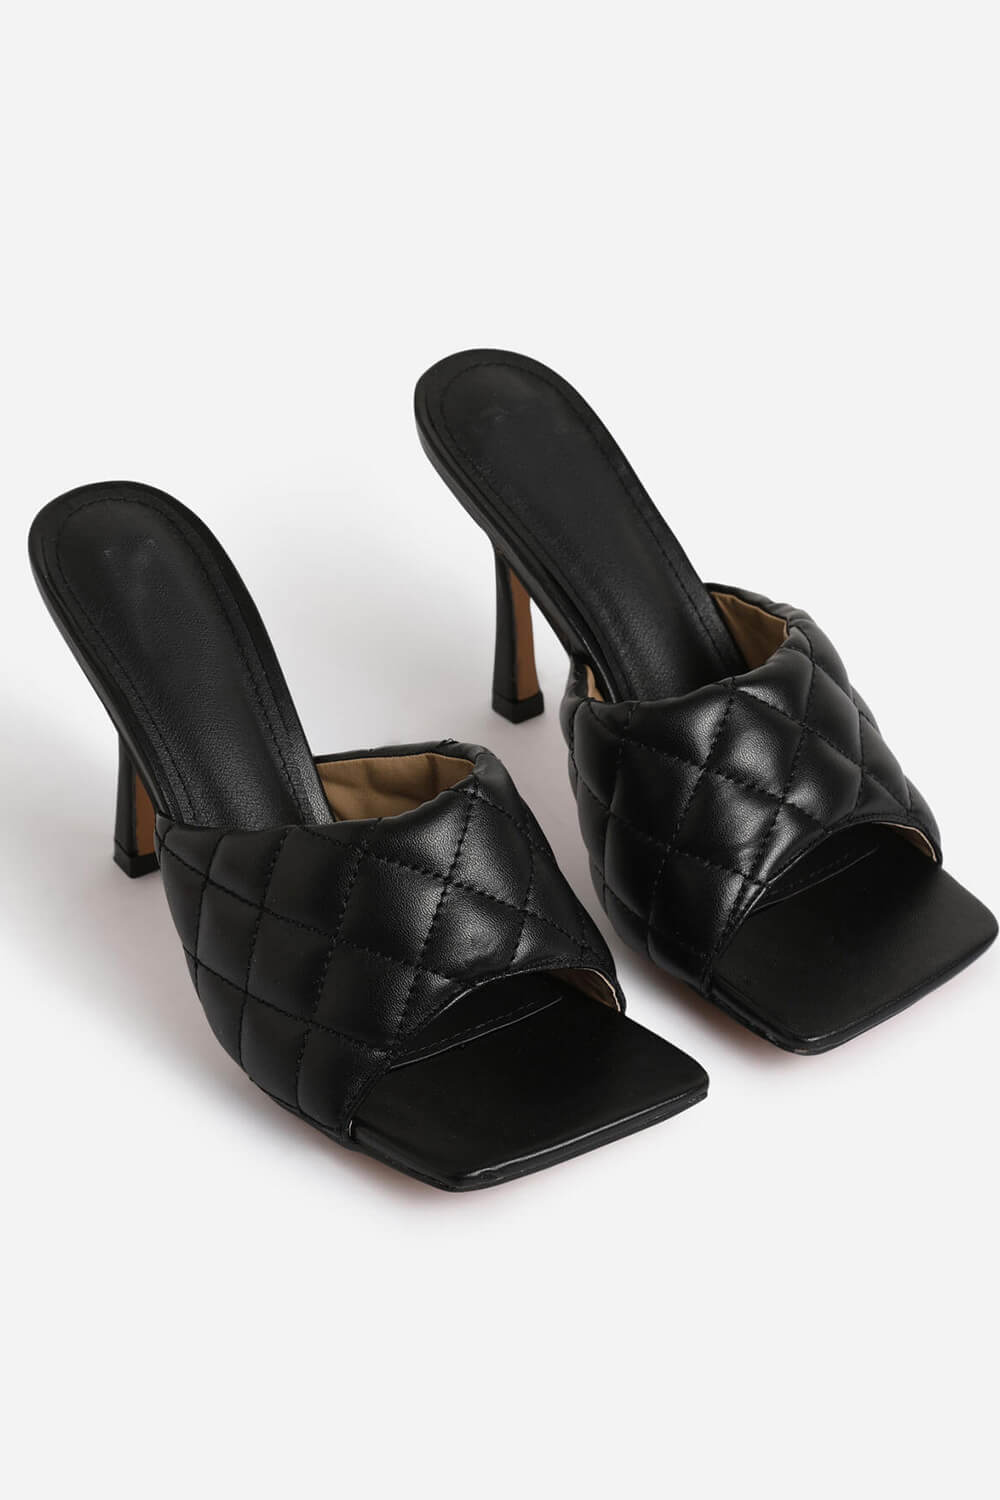 Black Faux Leather Square Toe Quilted Heeled Mules